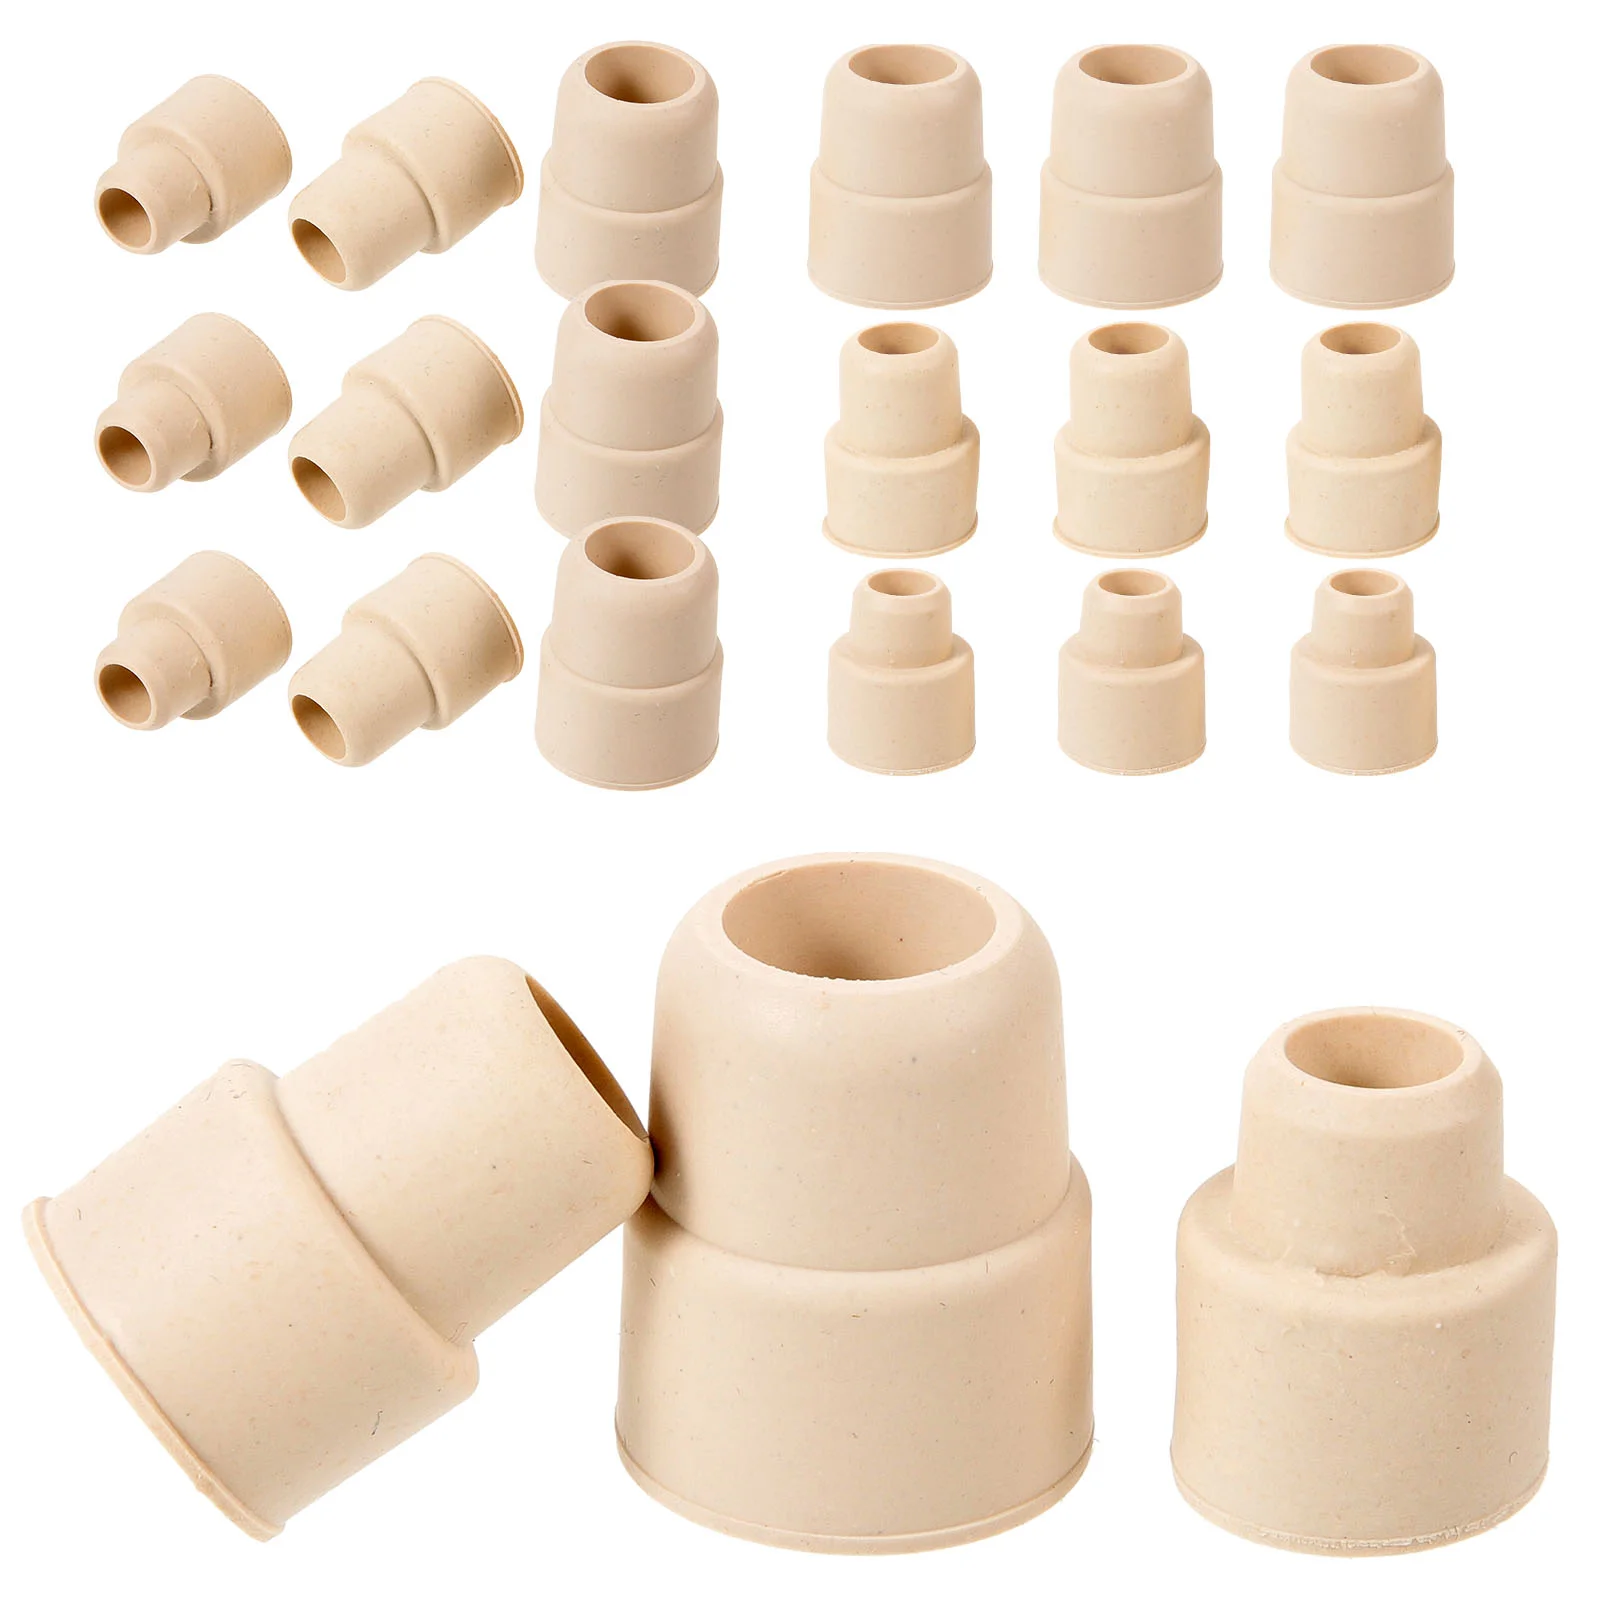 

30 Pcs Fermenter Daily Use Rubber Stopper Household Convenient Jug Replaceable Natural Plug Home Accessory Compact Fermented